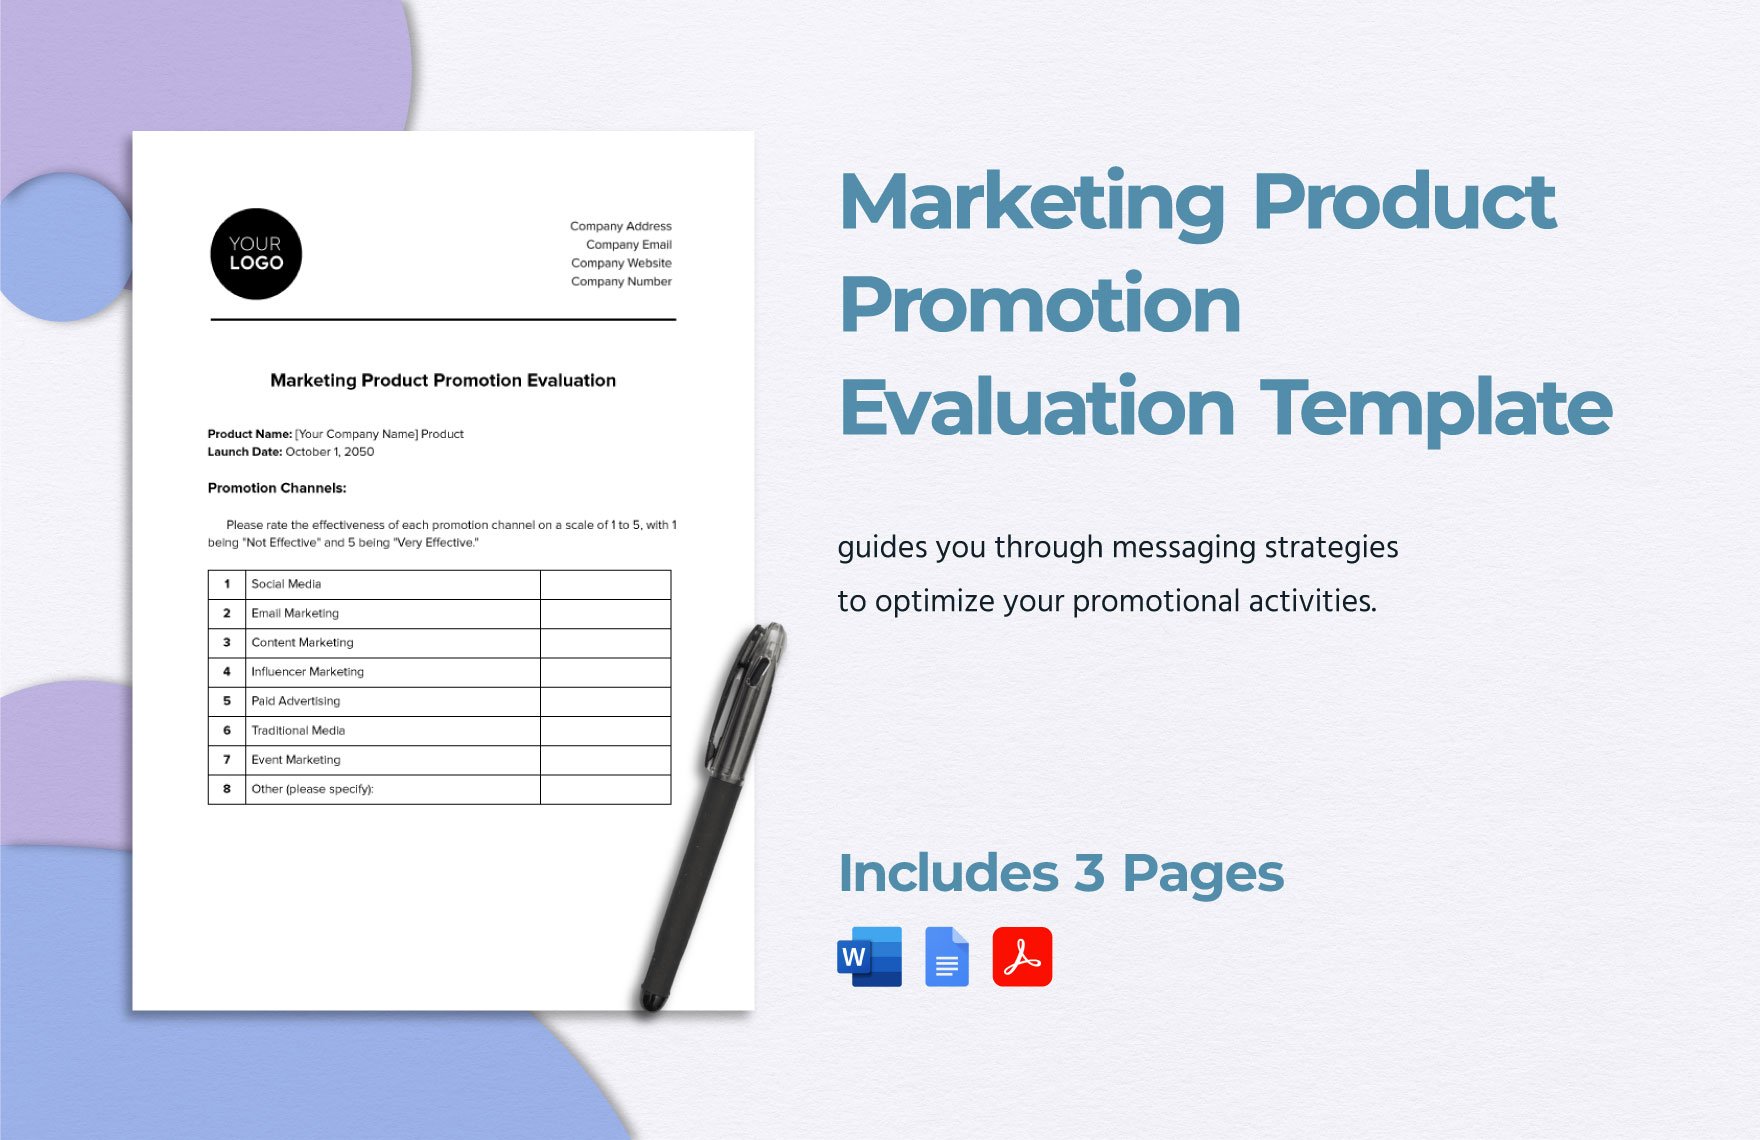 Marketing Product Promotion Evaluation Template in Word, Google Docs, PDF